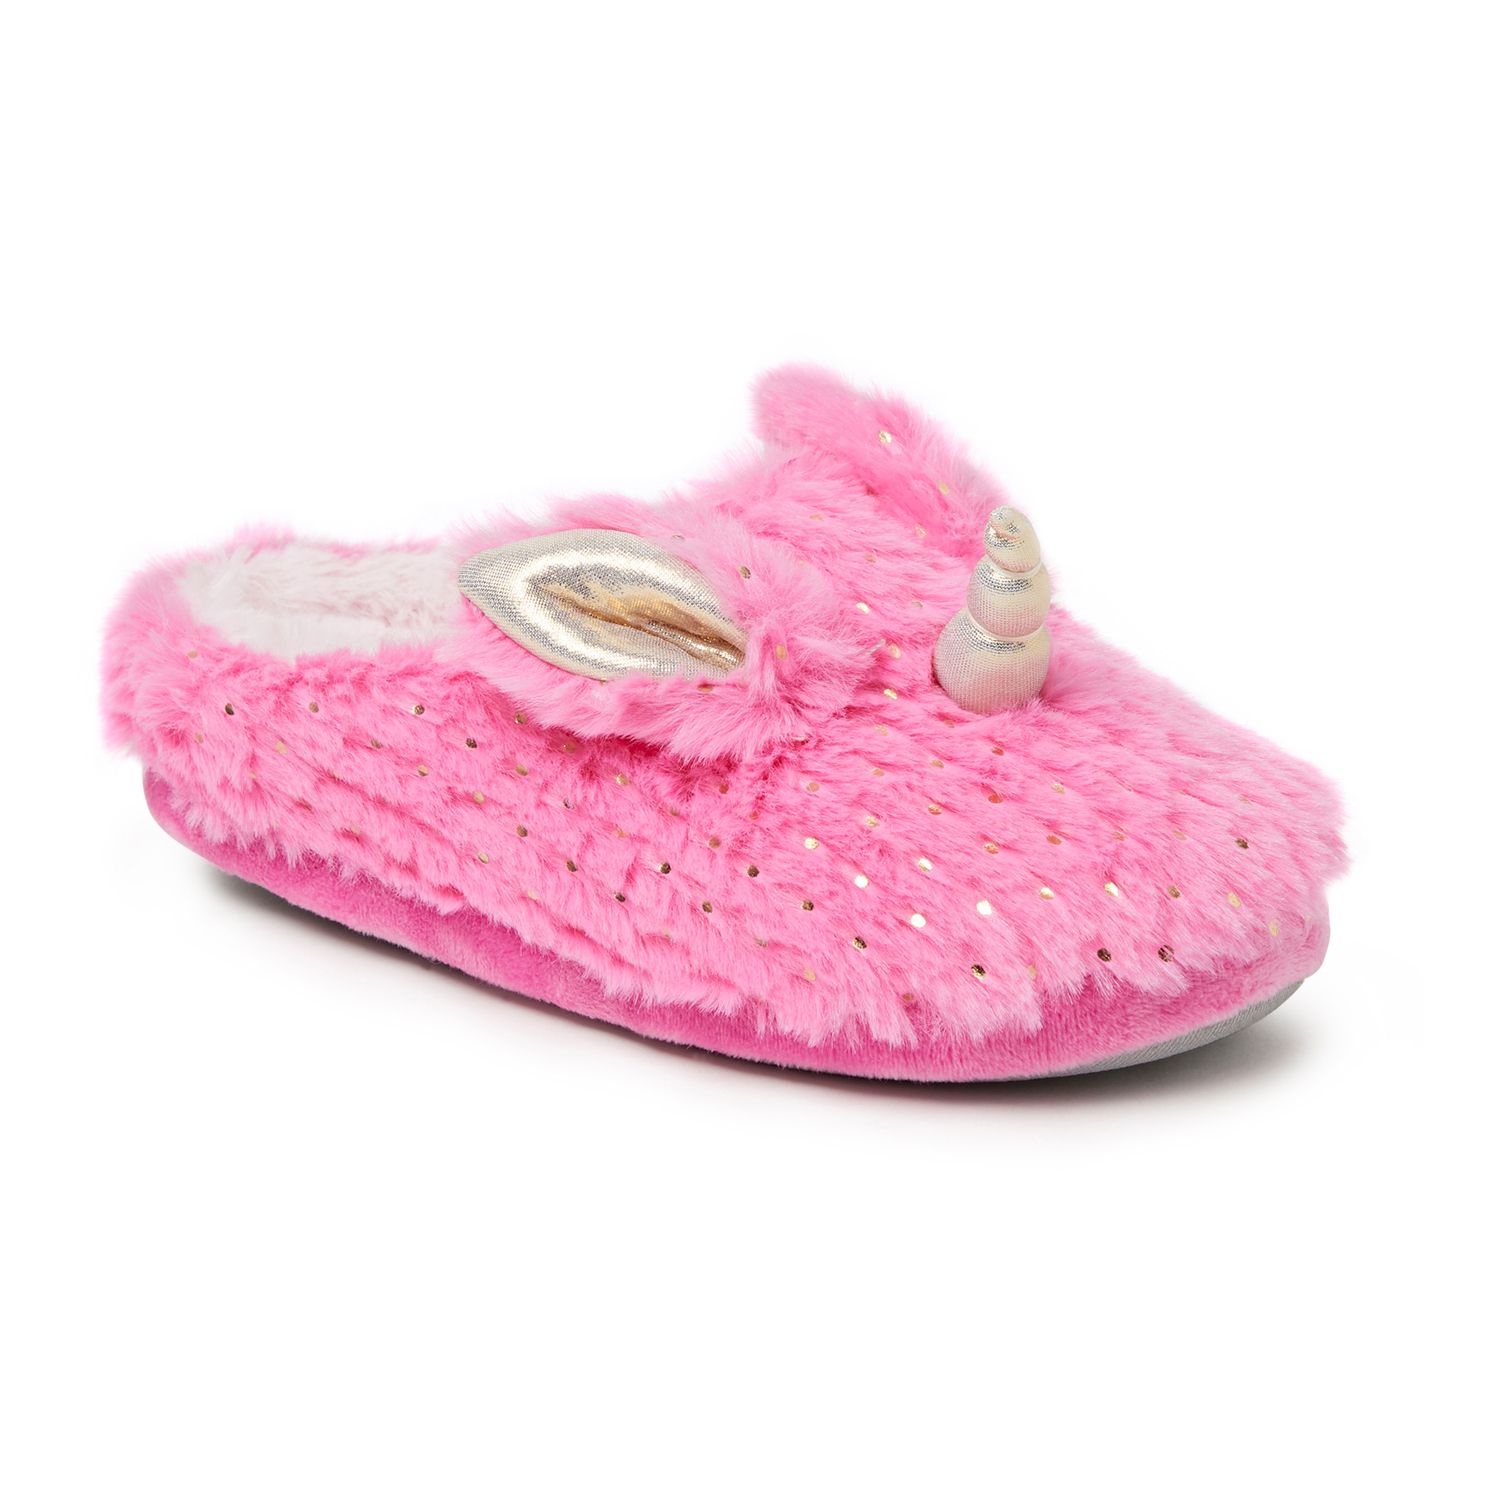 toddlers slippers size 4